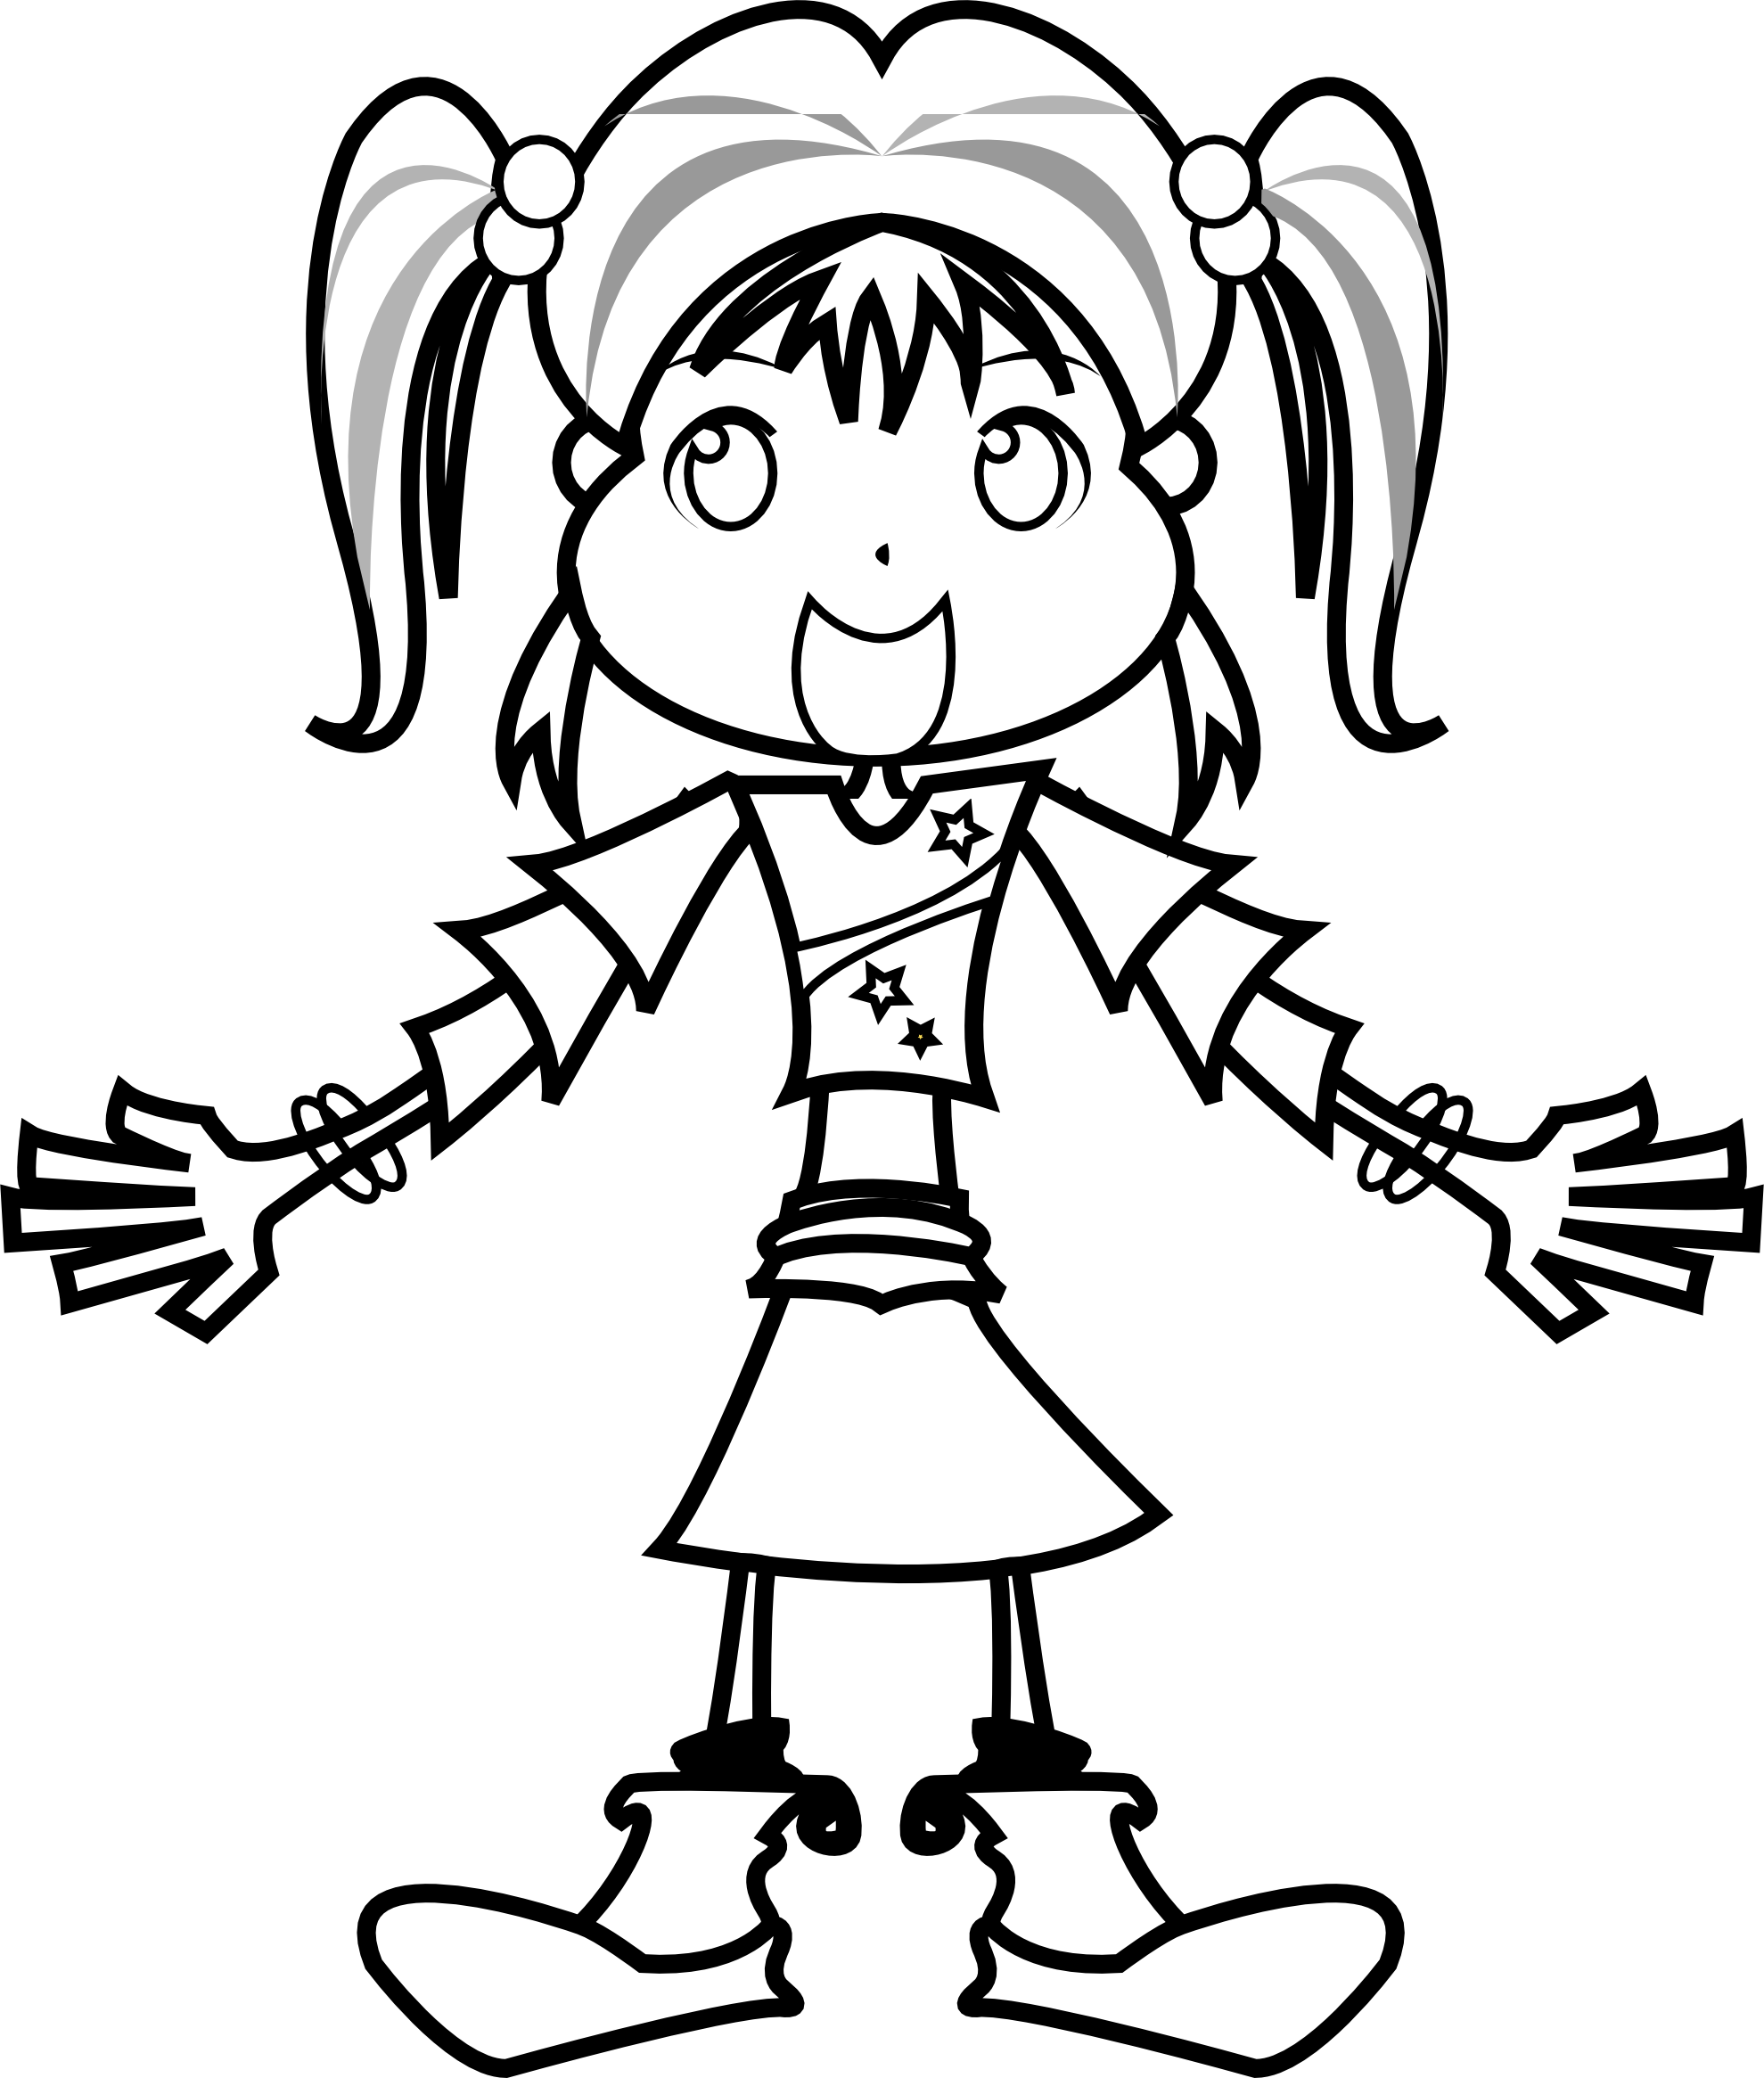 A black and white girl in a lifeboat together clipart